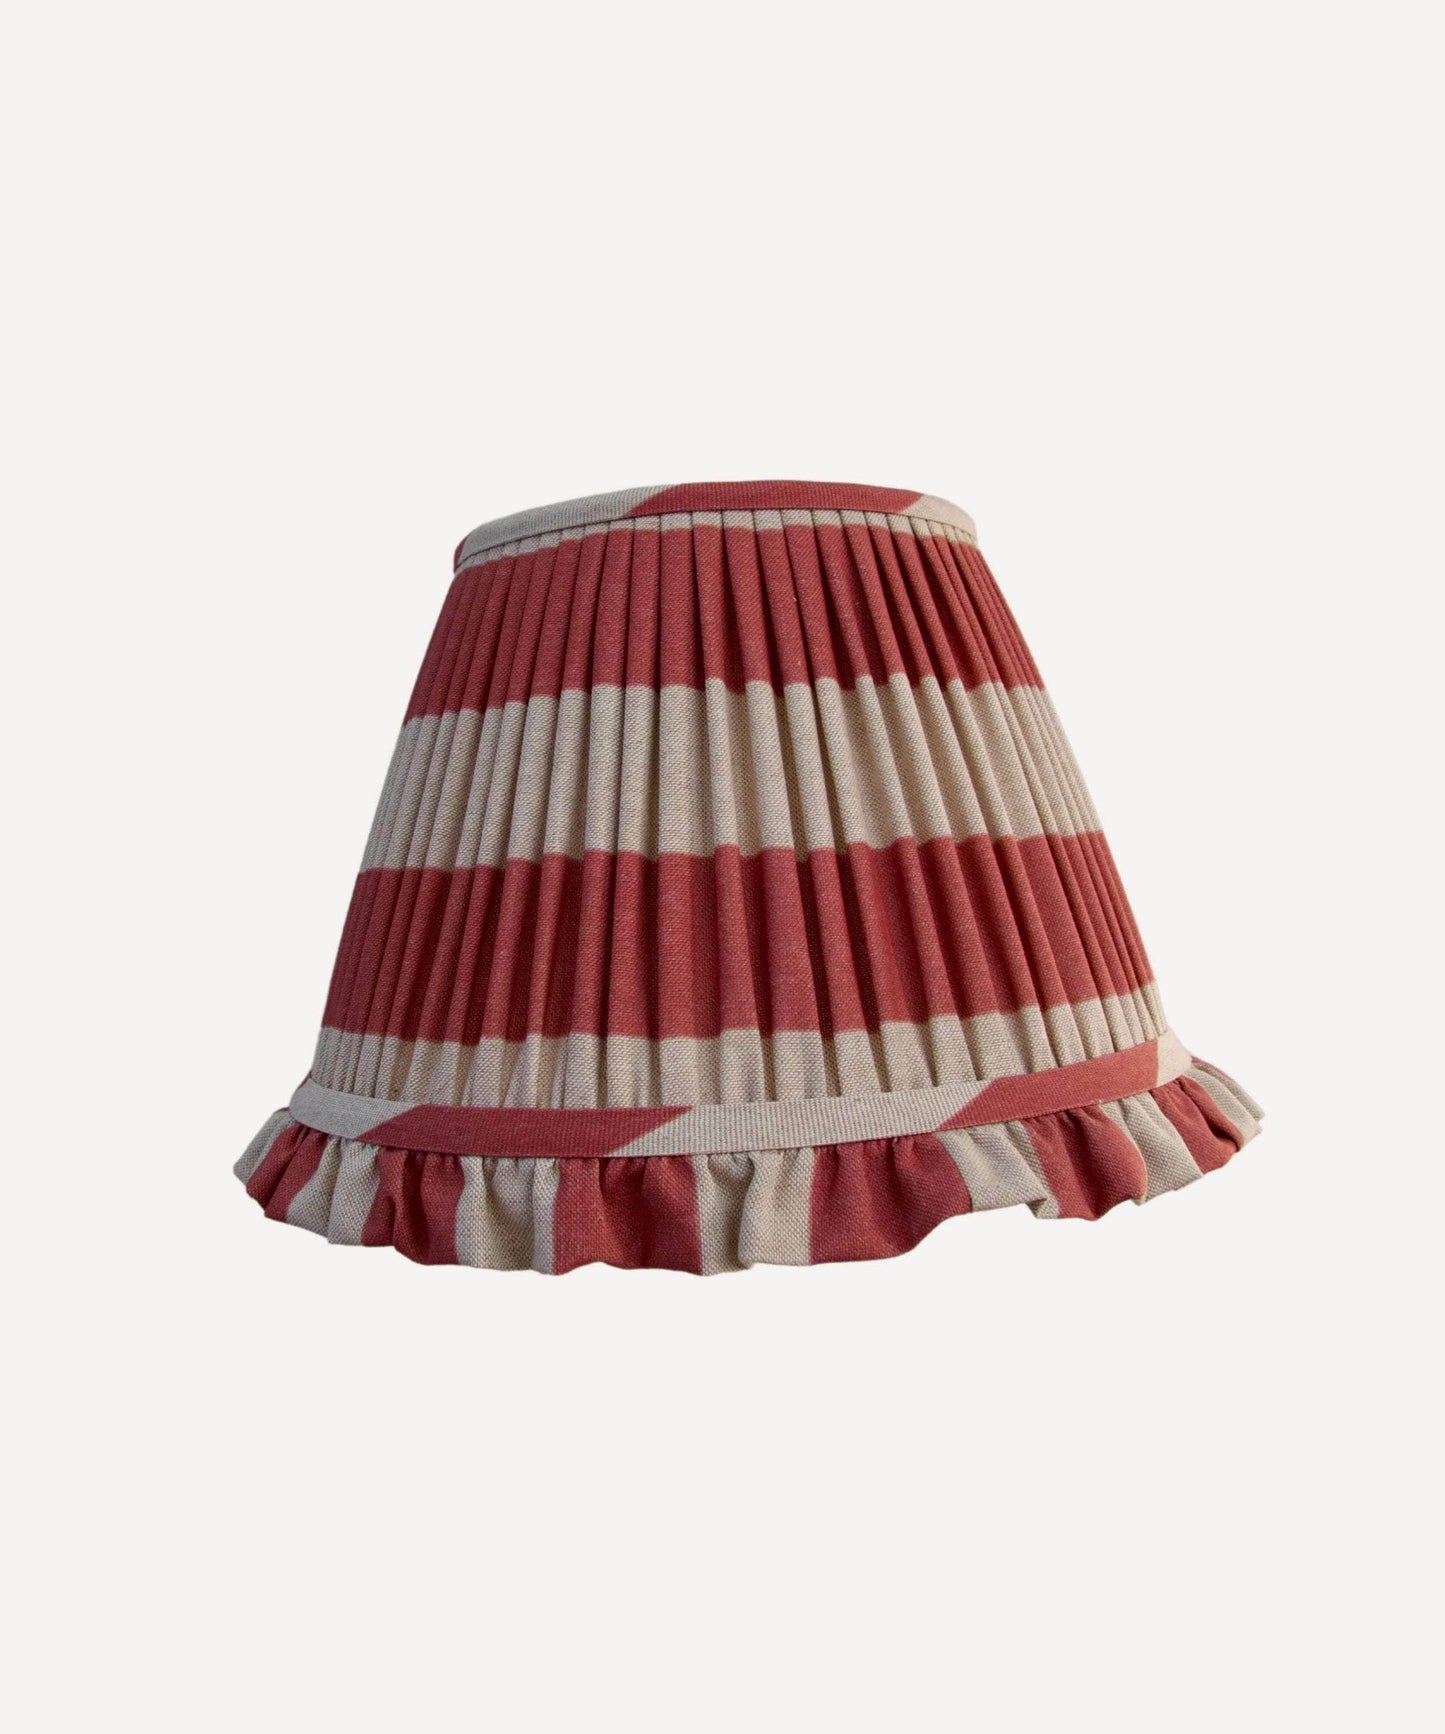 Faded Cherry Lampshade